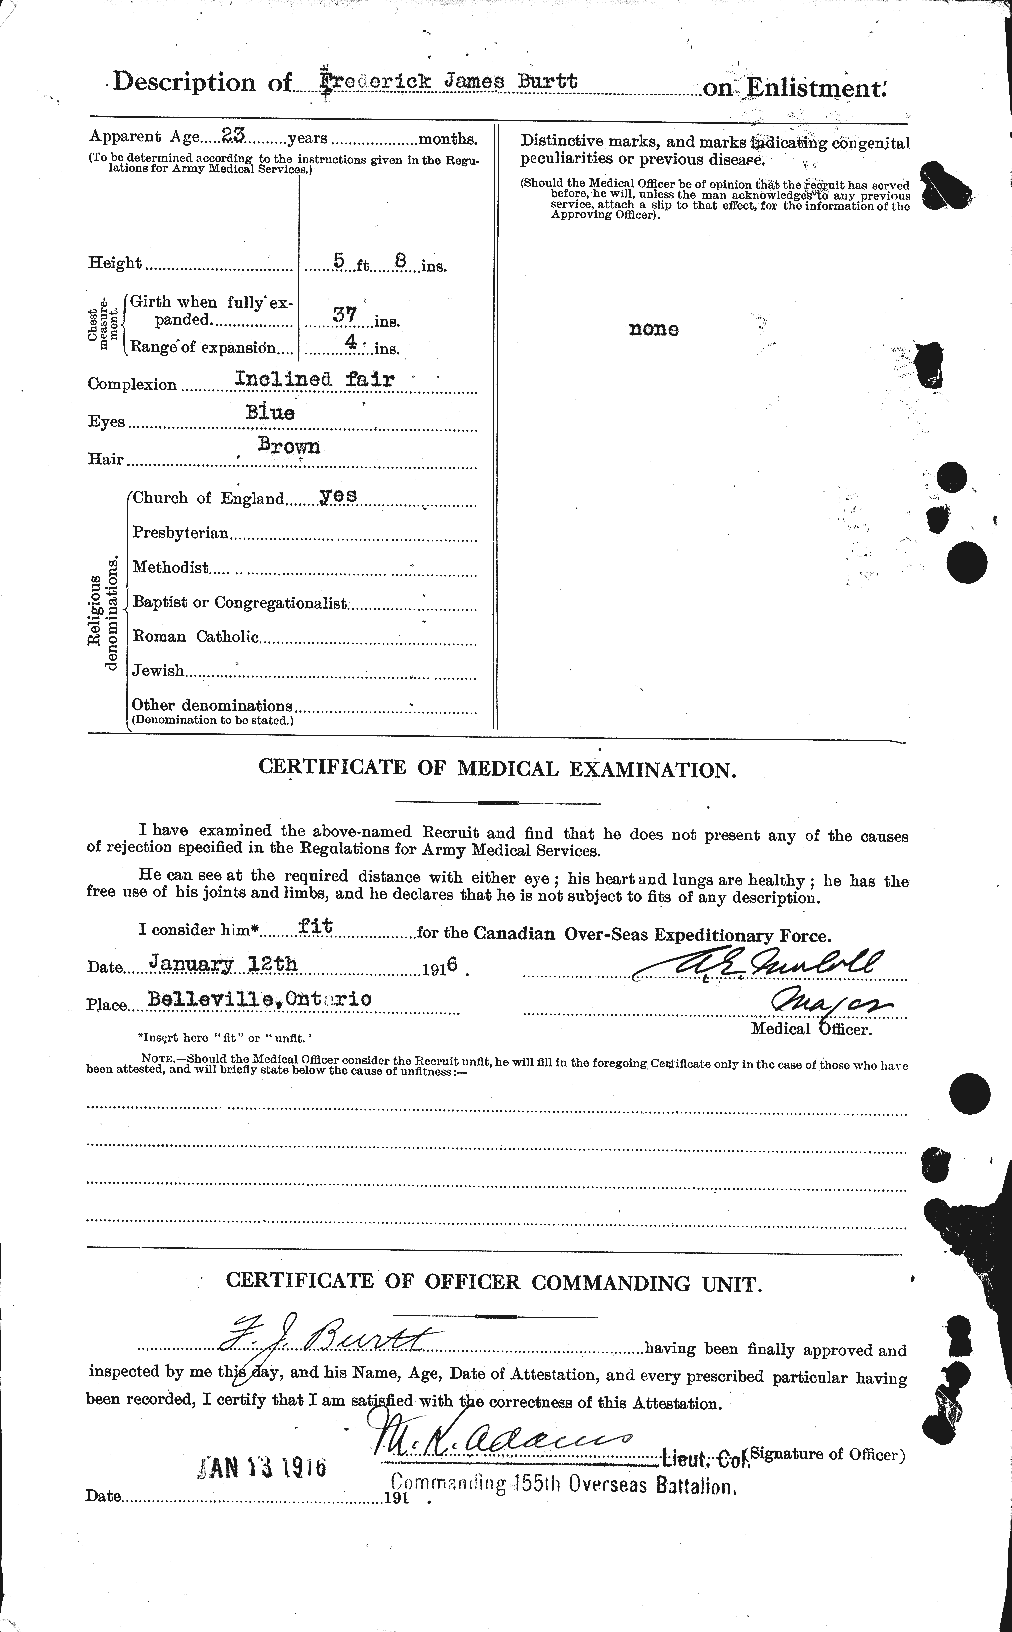 Personnel Records of the First World War - CEF 272779b